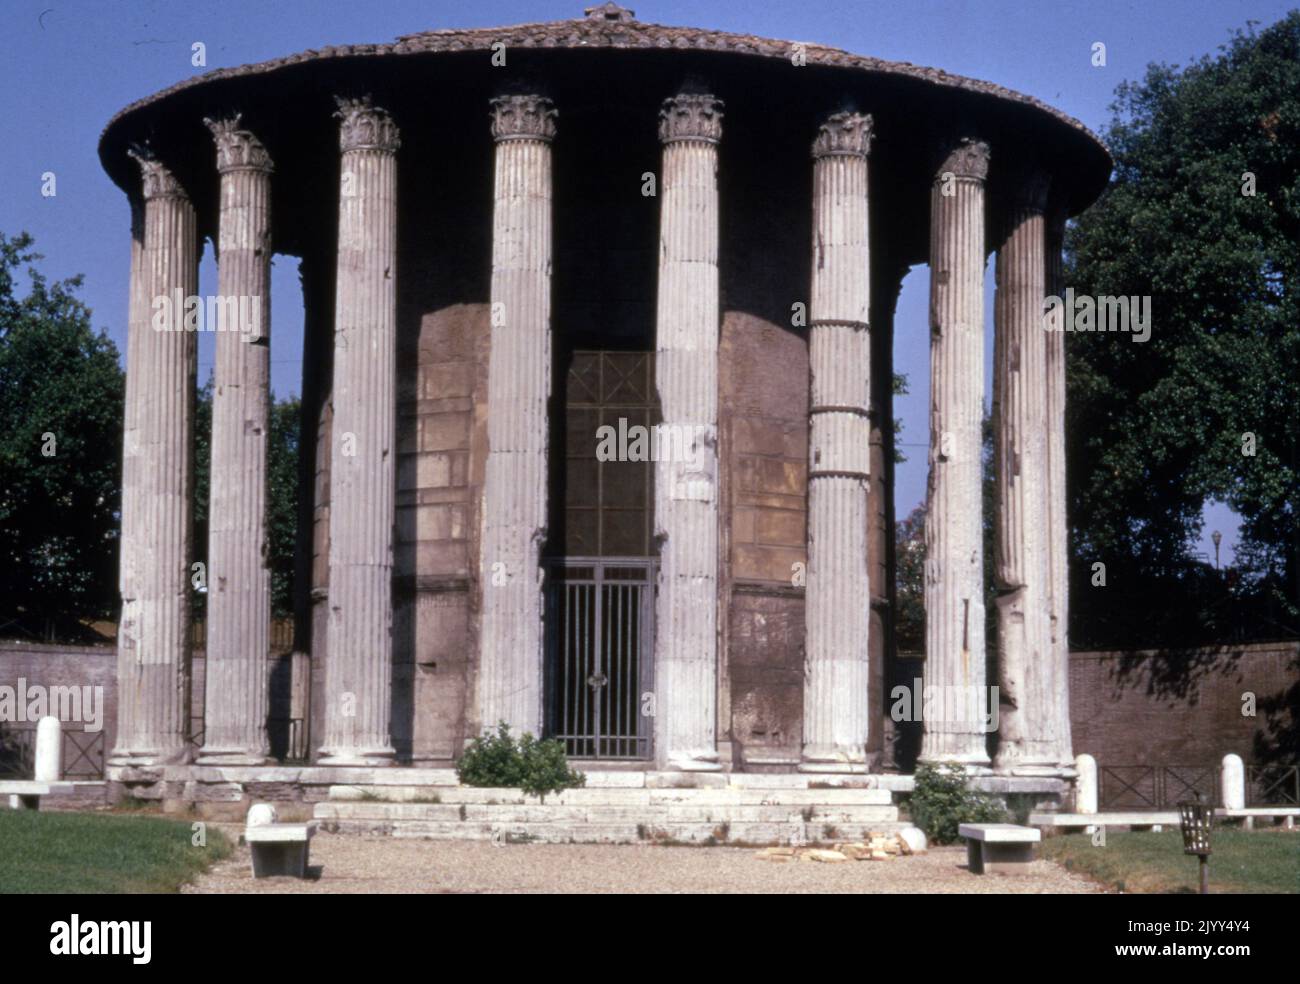 The Temple of Vesta, an ancient edifice in Rome, Italy, located in the Roman Forum near the Regia and the House of the Vestal Virgins. The temple's most recognizable feature is its circular footprint. Since the worship of Vesta began in private homes, the architecture seems to be a reminder of its history. The extant temple used Greek architecture with Corinthian columns, marble, and a central cella. The remaining structure indicates that there were twenty Corinthian columns built on a podium fifteen meters in diameter. Stock Photo